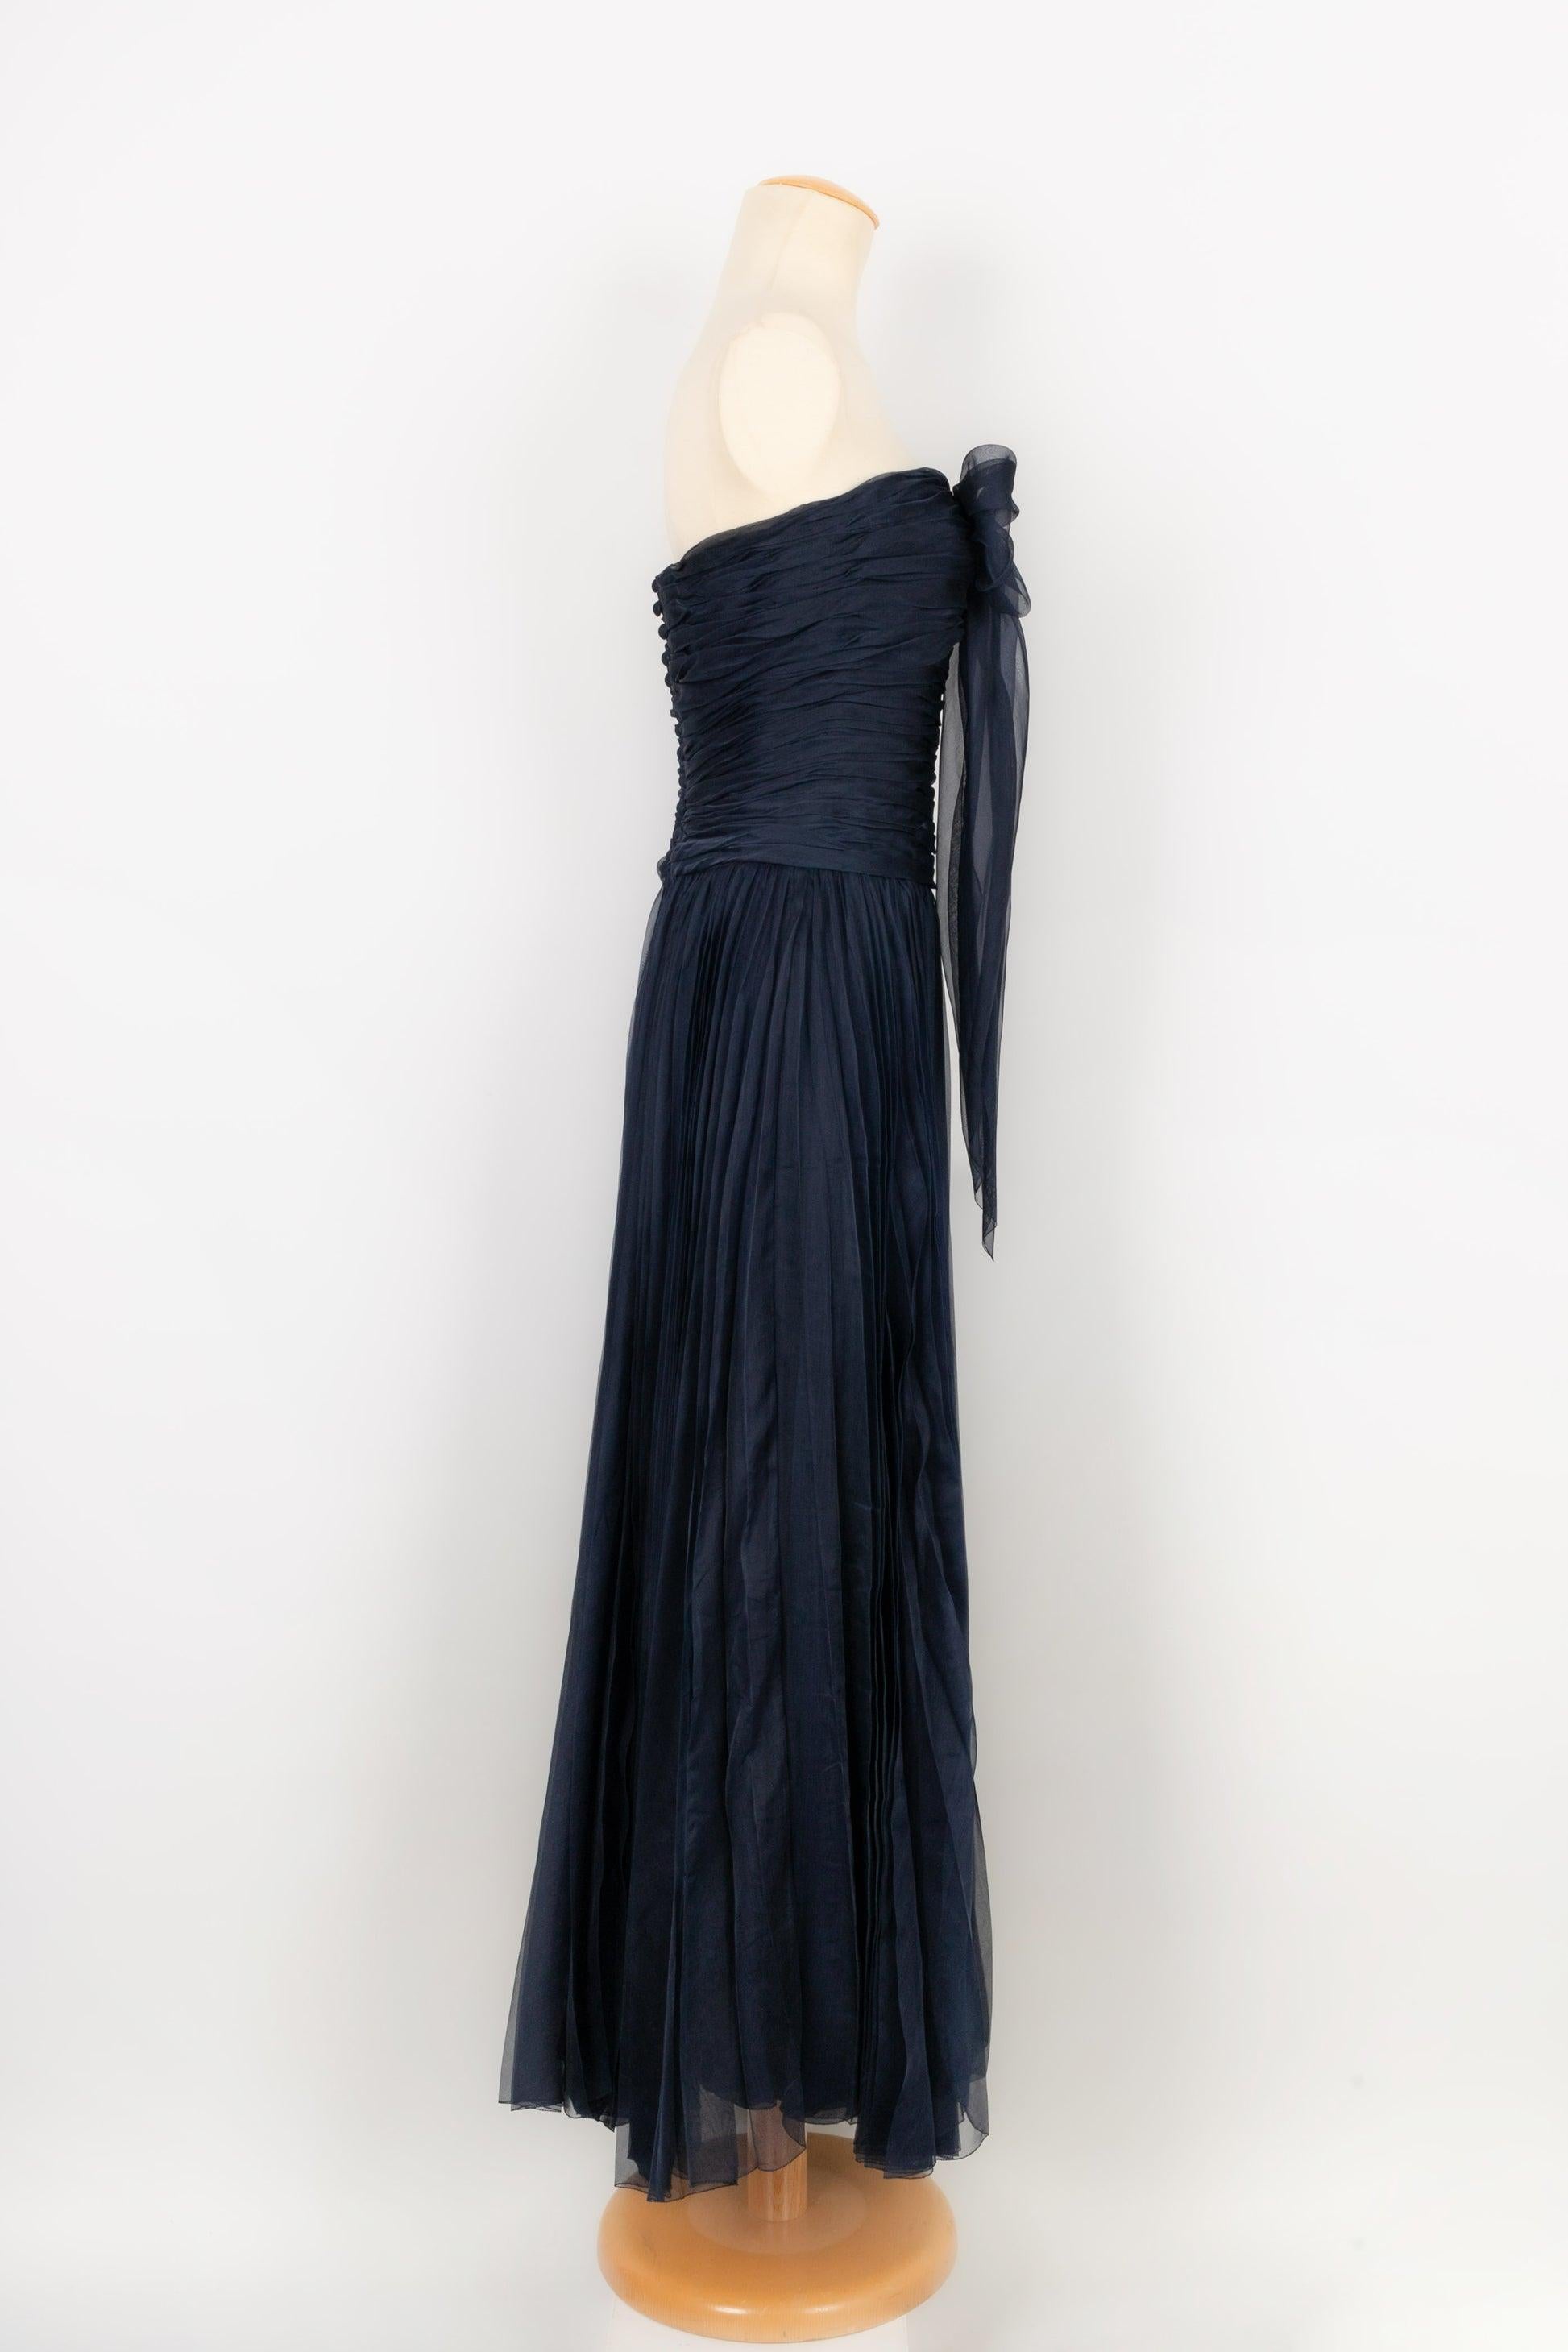 Chanel - Long bustier dress in navy blue pleated silk taffeta. No size nor composition label, it fits a 38FR.

Additional information:
Condition: Very good condition
Dimensions: Chest: 35 cm - Waist: 34 cm - Length: 125 cm

Seller Reference: VR192
